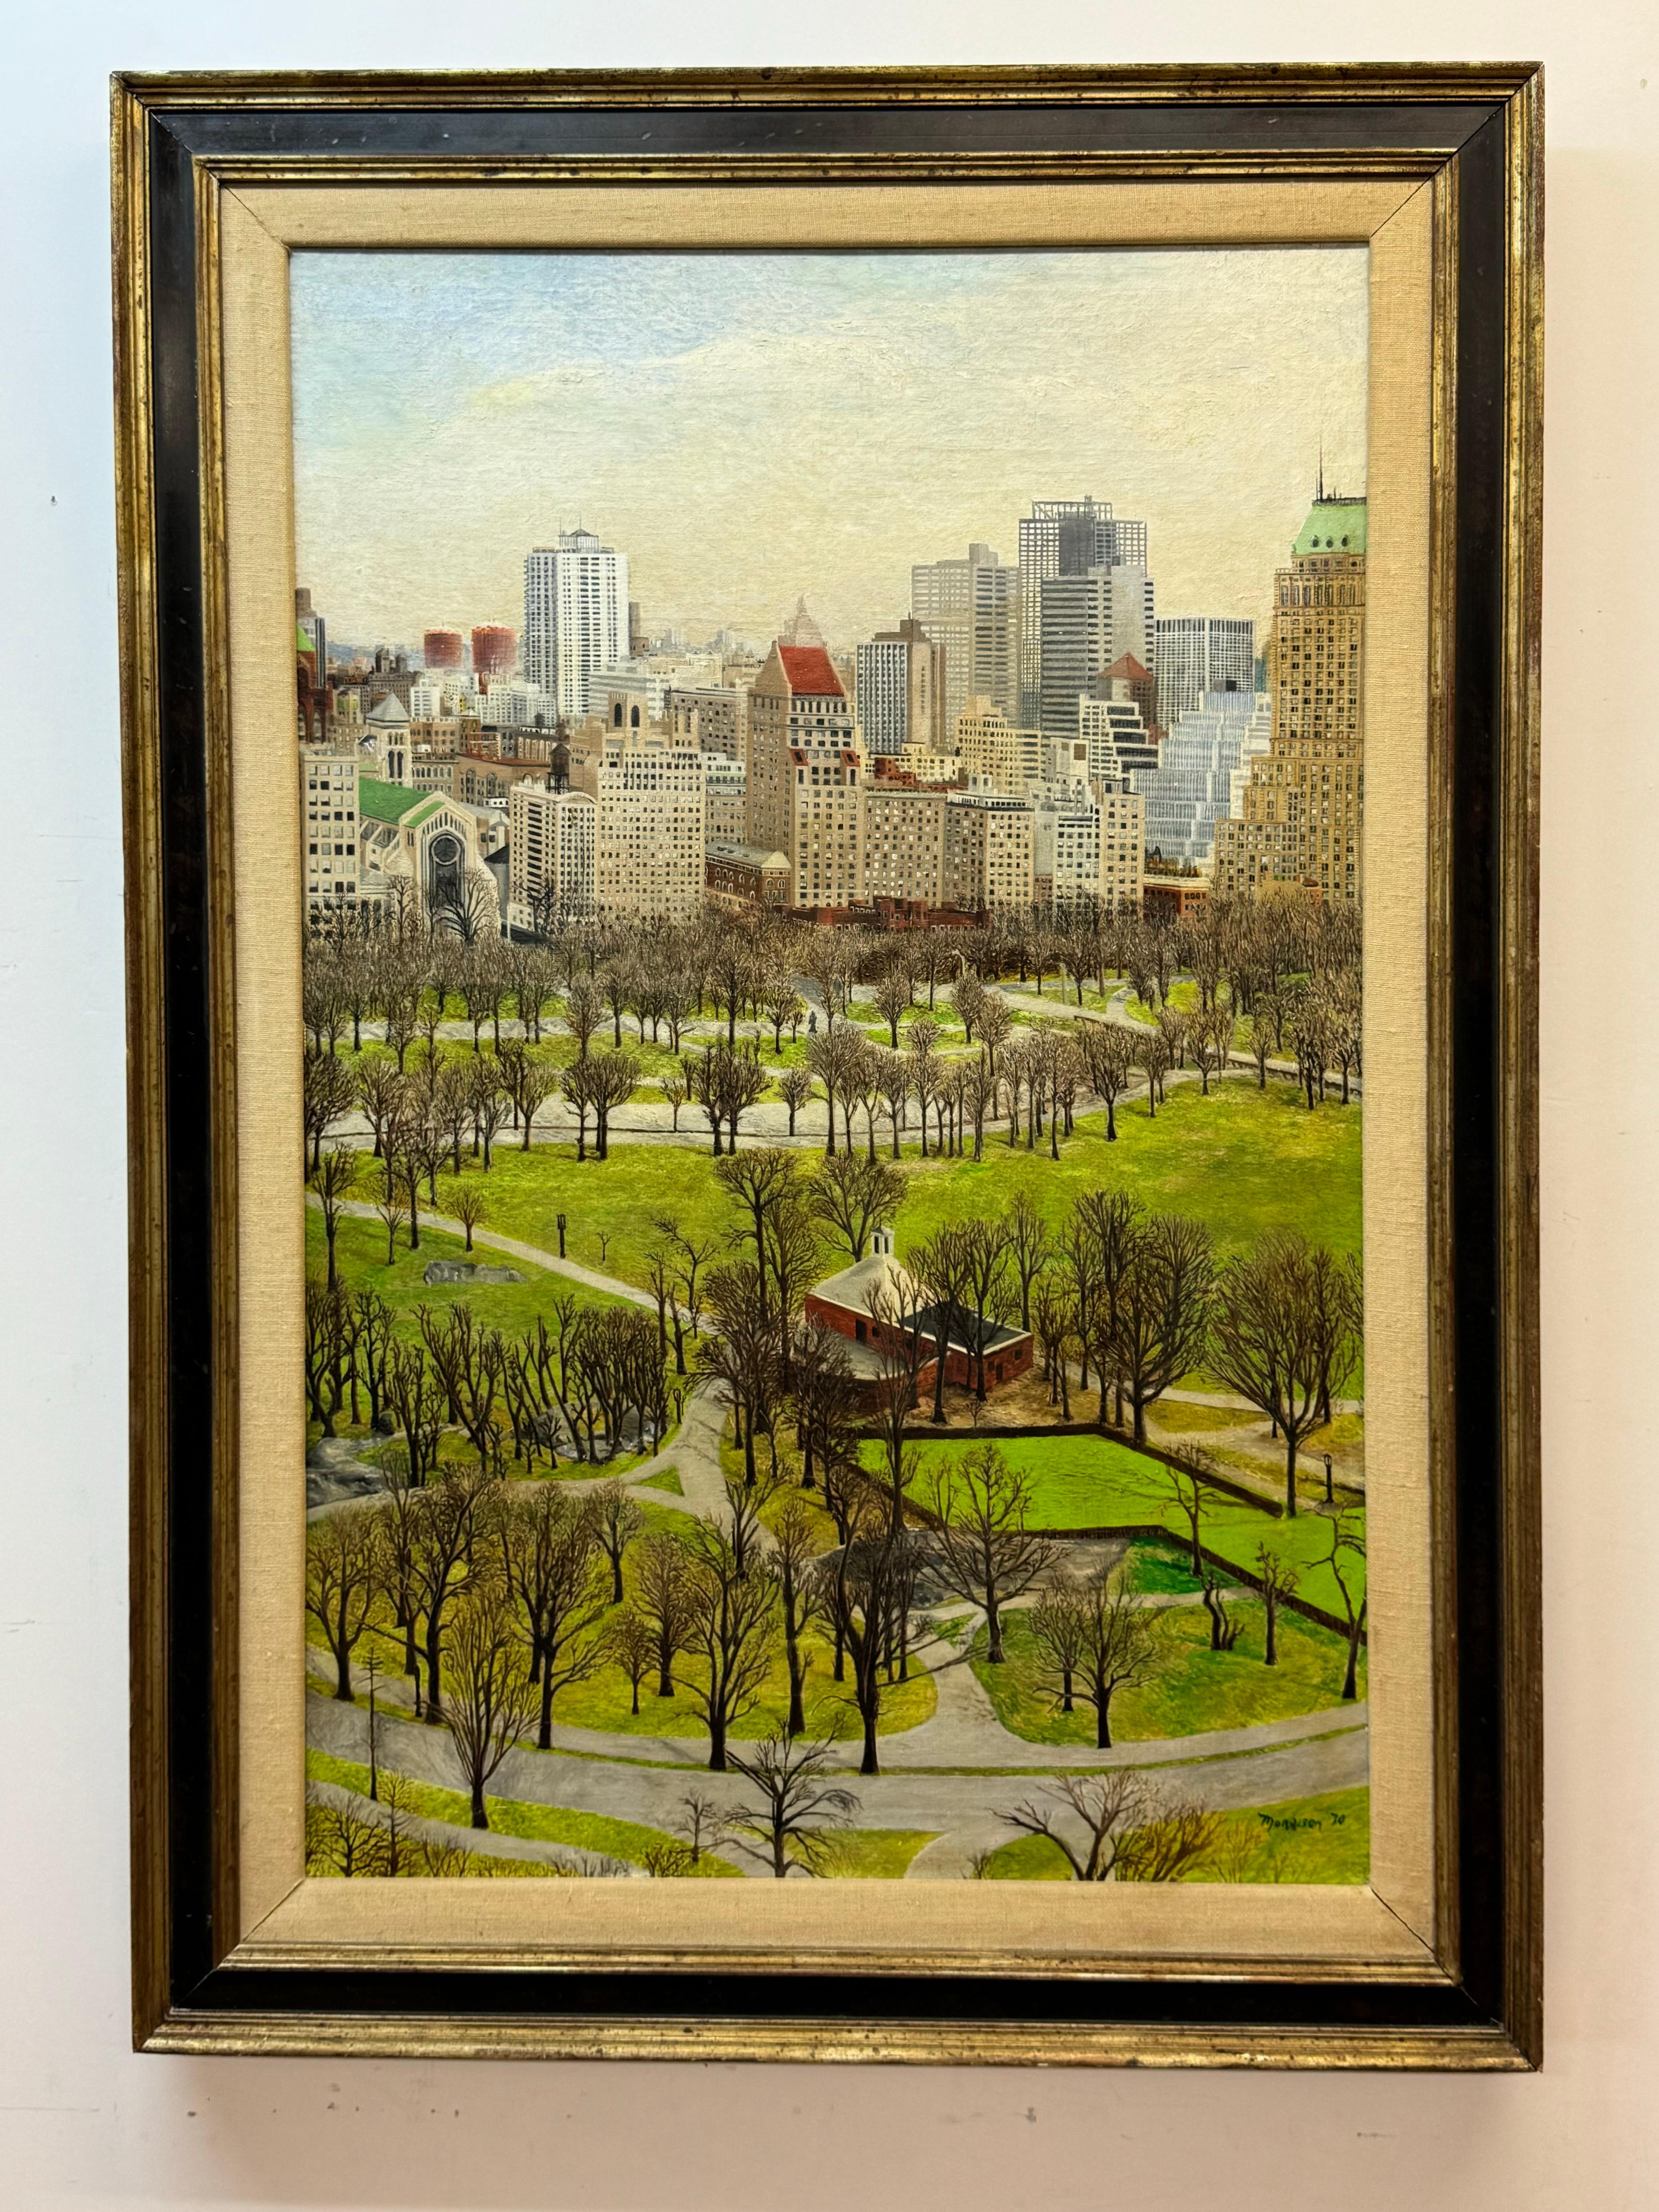 New York City South Central Park original painting by Morrison circa 1970. Brilliant, New York oil painting with Birdseye view of the park with bearing trees and encroaching skyscrapers at the parks edge. Oil on canvas. 23 x 35 unframed, 29.5 x 41.5